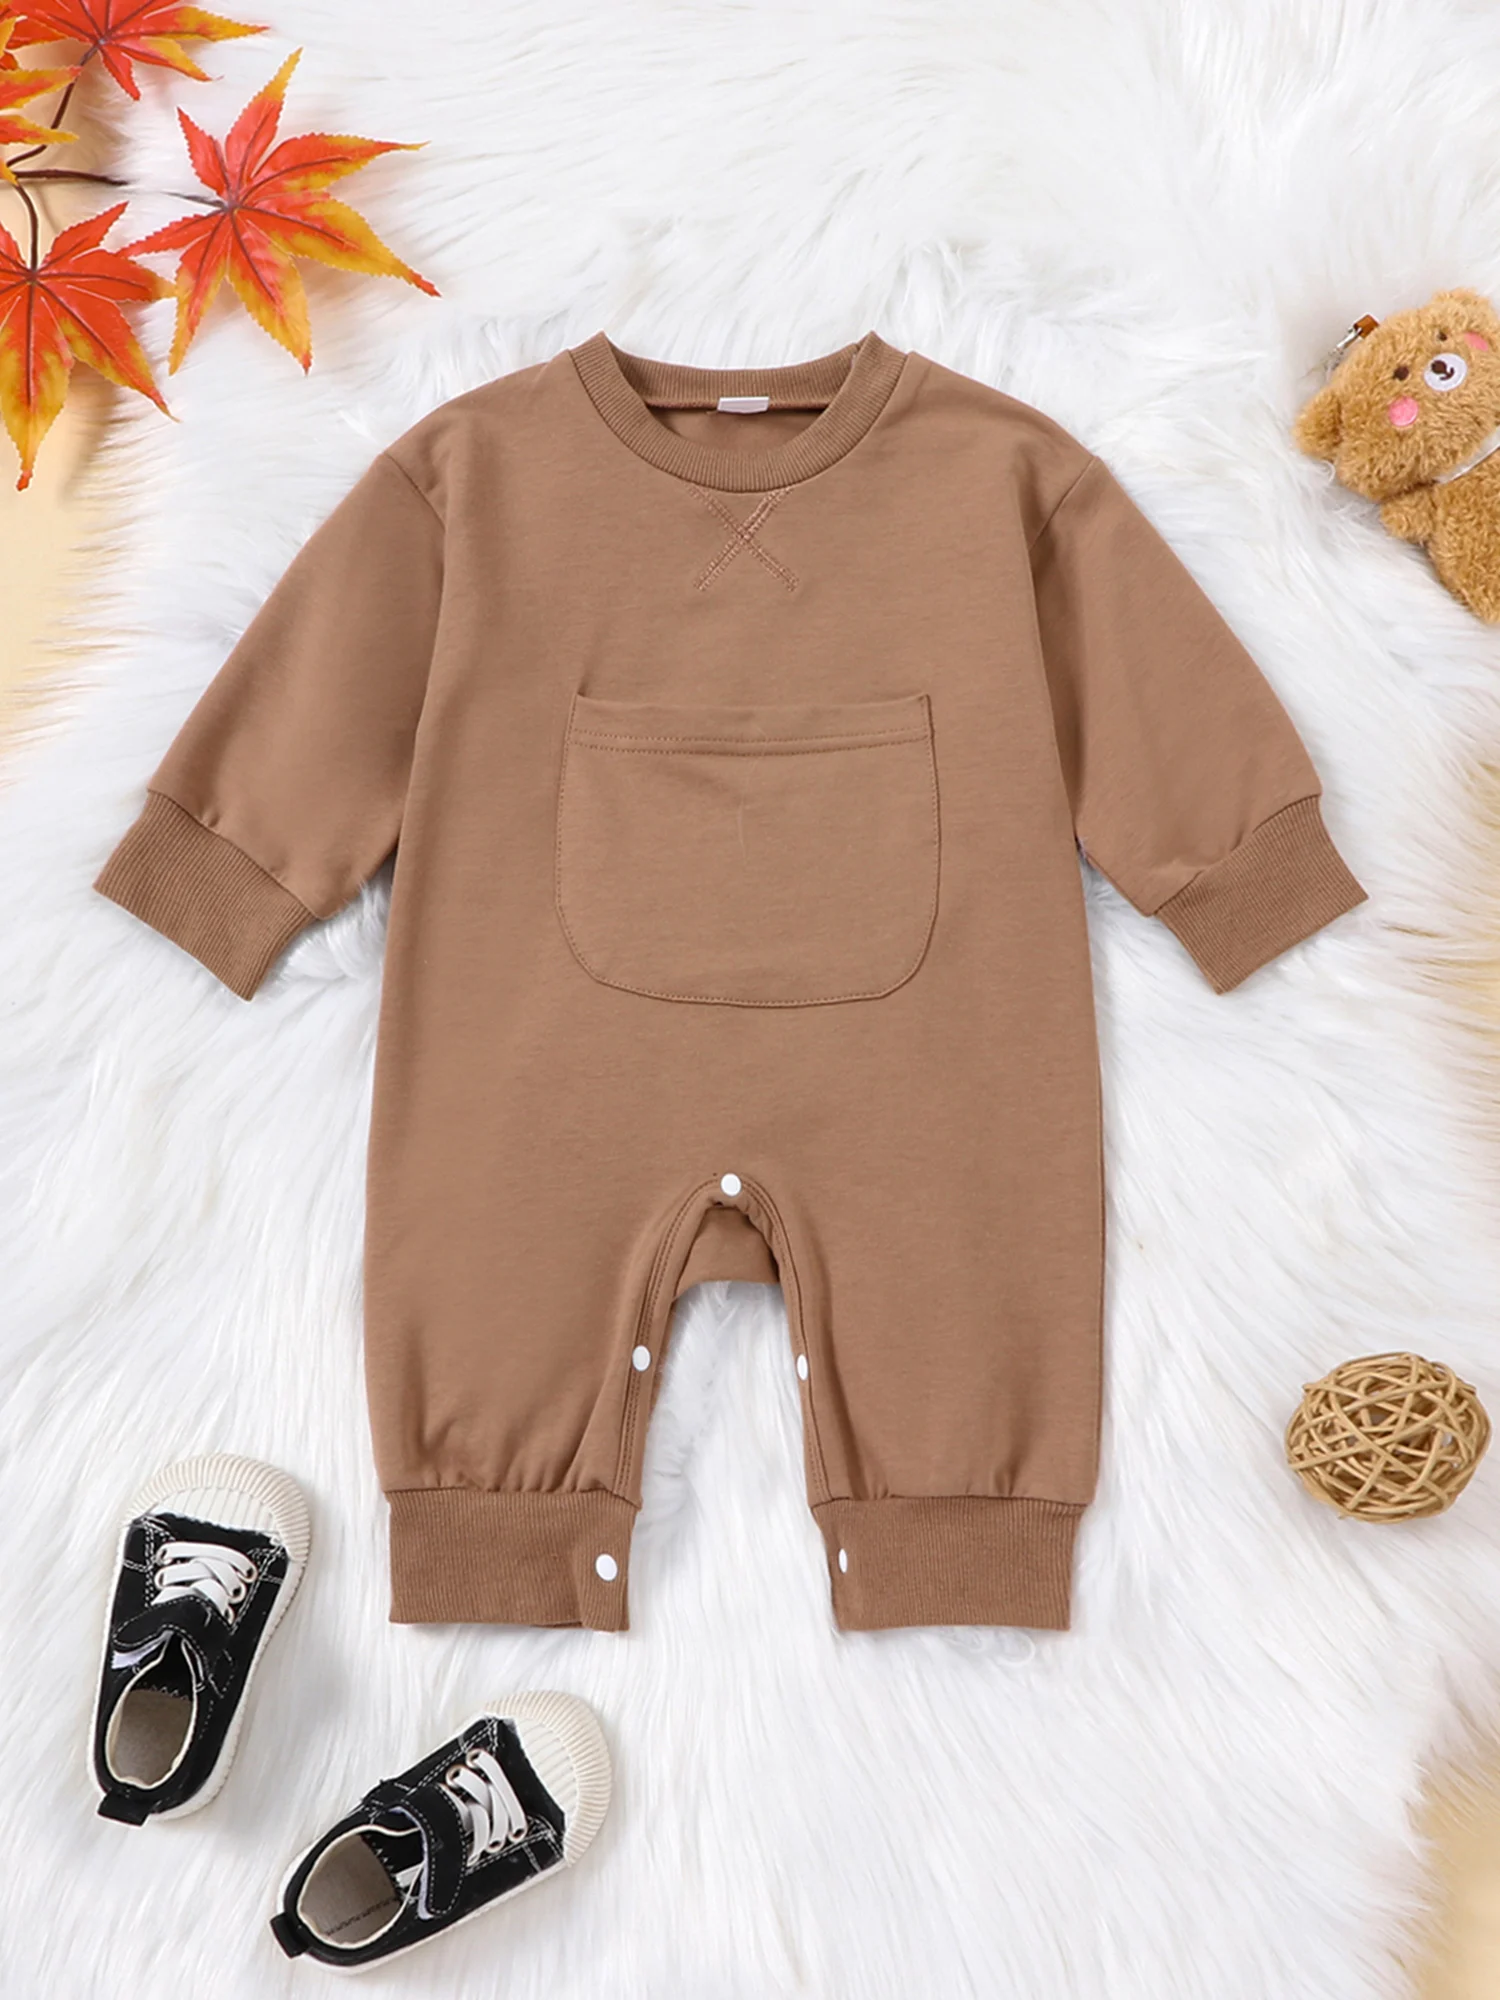 

Adorable Infant Unisex Hooded with Front Zipper Closure and Cute Animal Ears - Cozy Fall Romper for Newborns